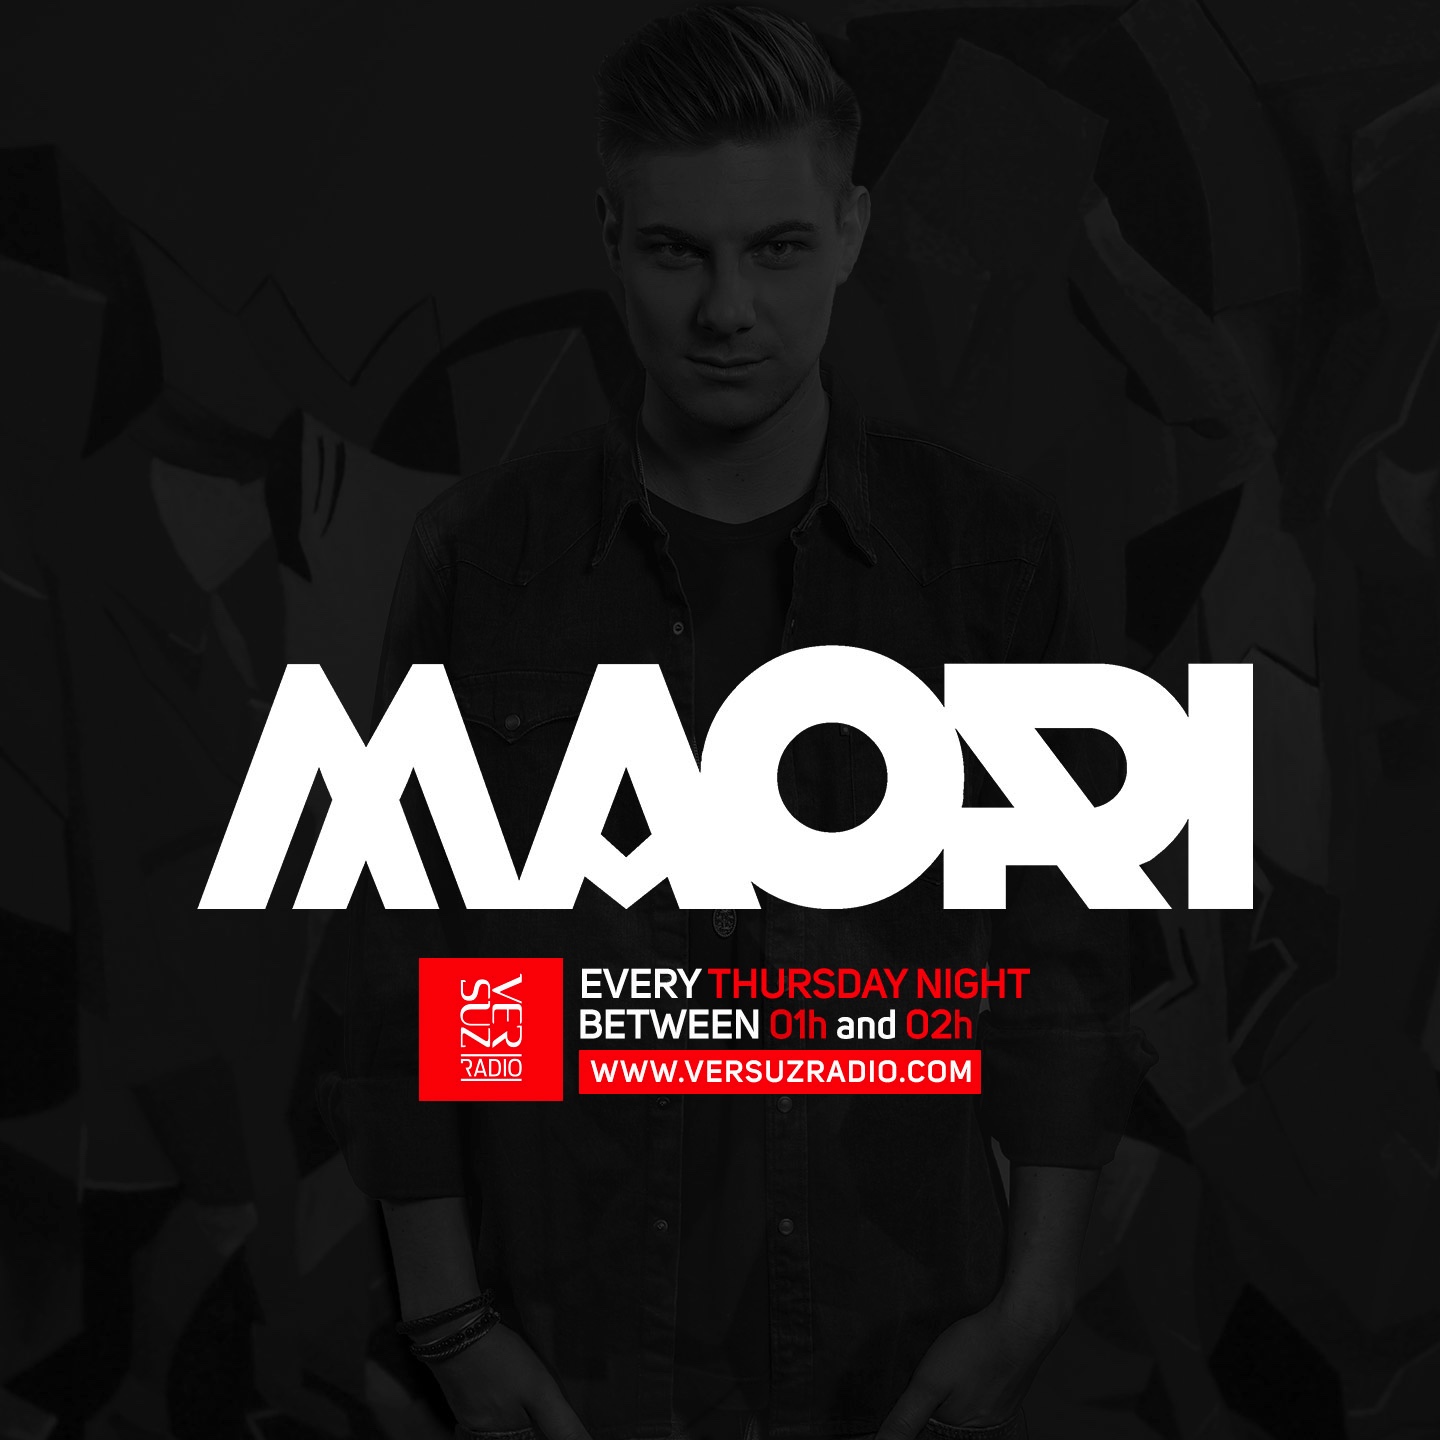 Clubhouse Radio by Maori - Episode #016